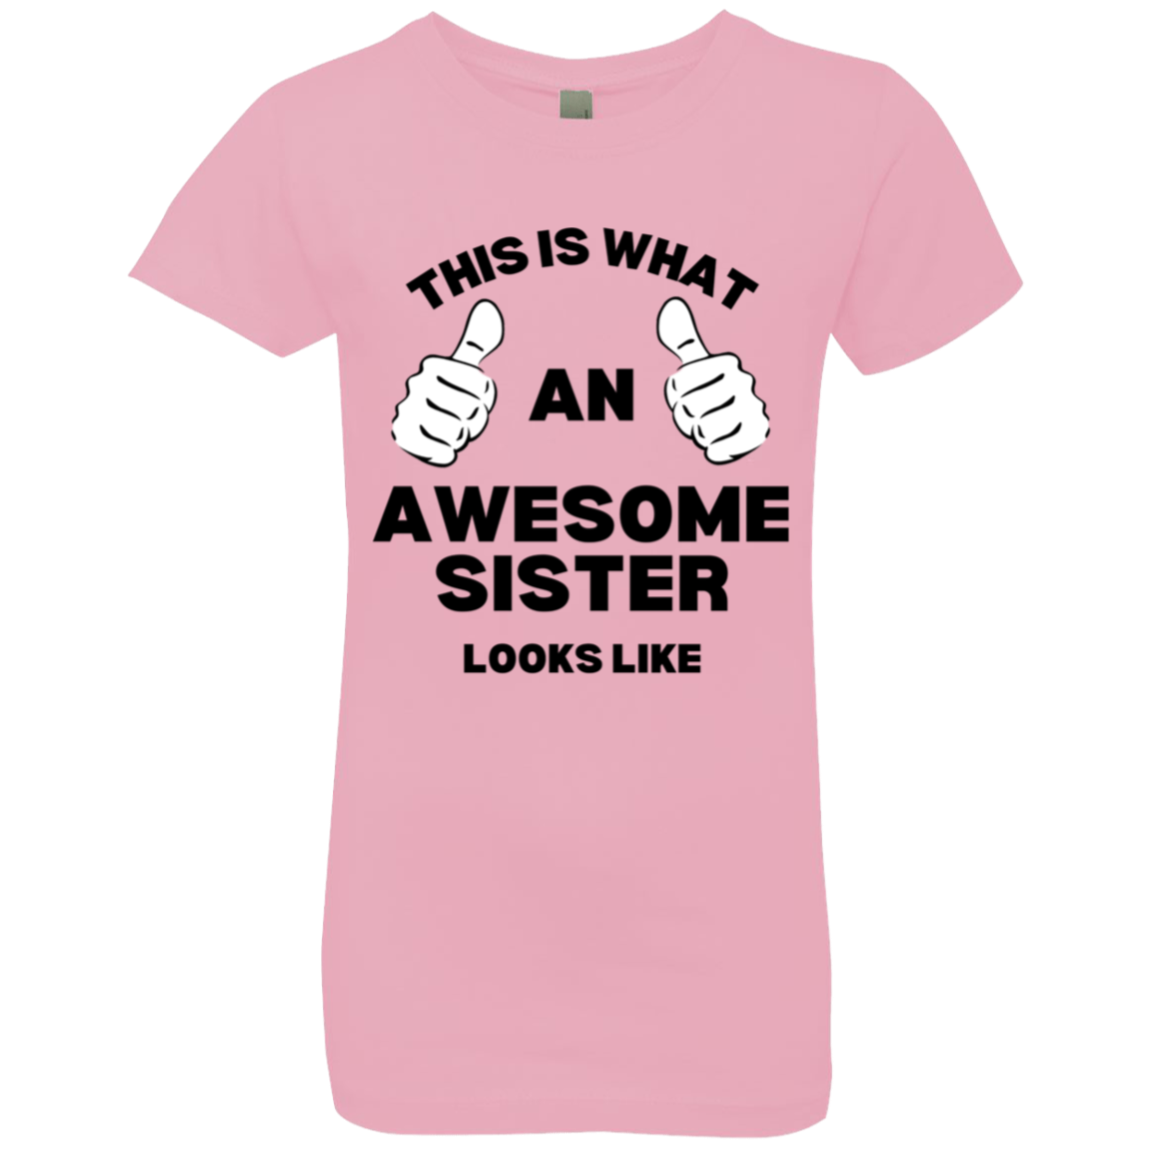 Awesome Sister Girl's Princess T-Shirt (Youth)